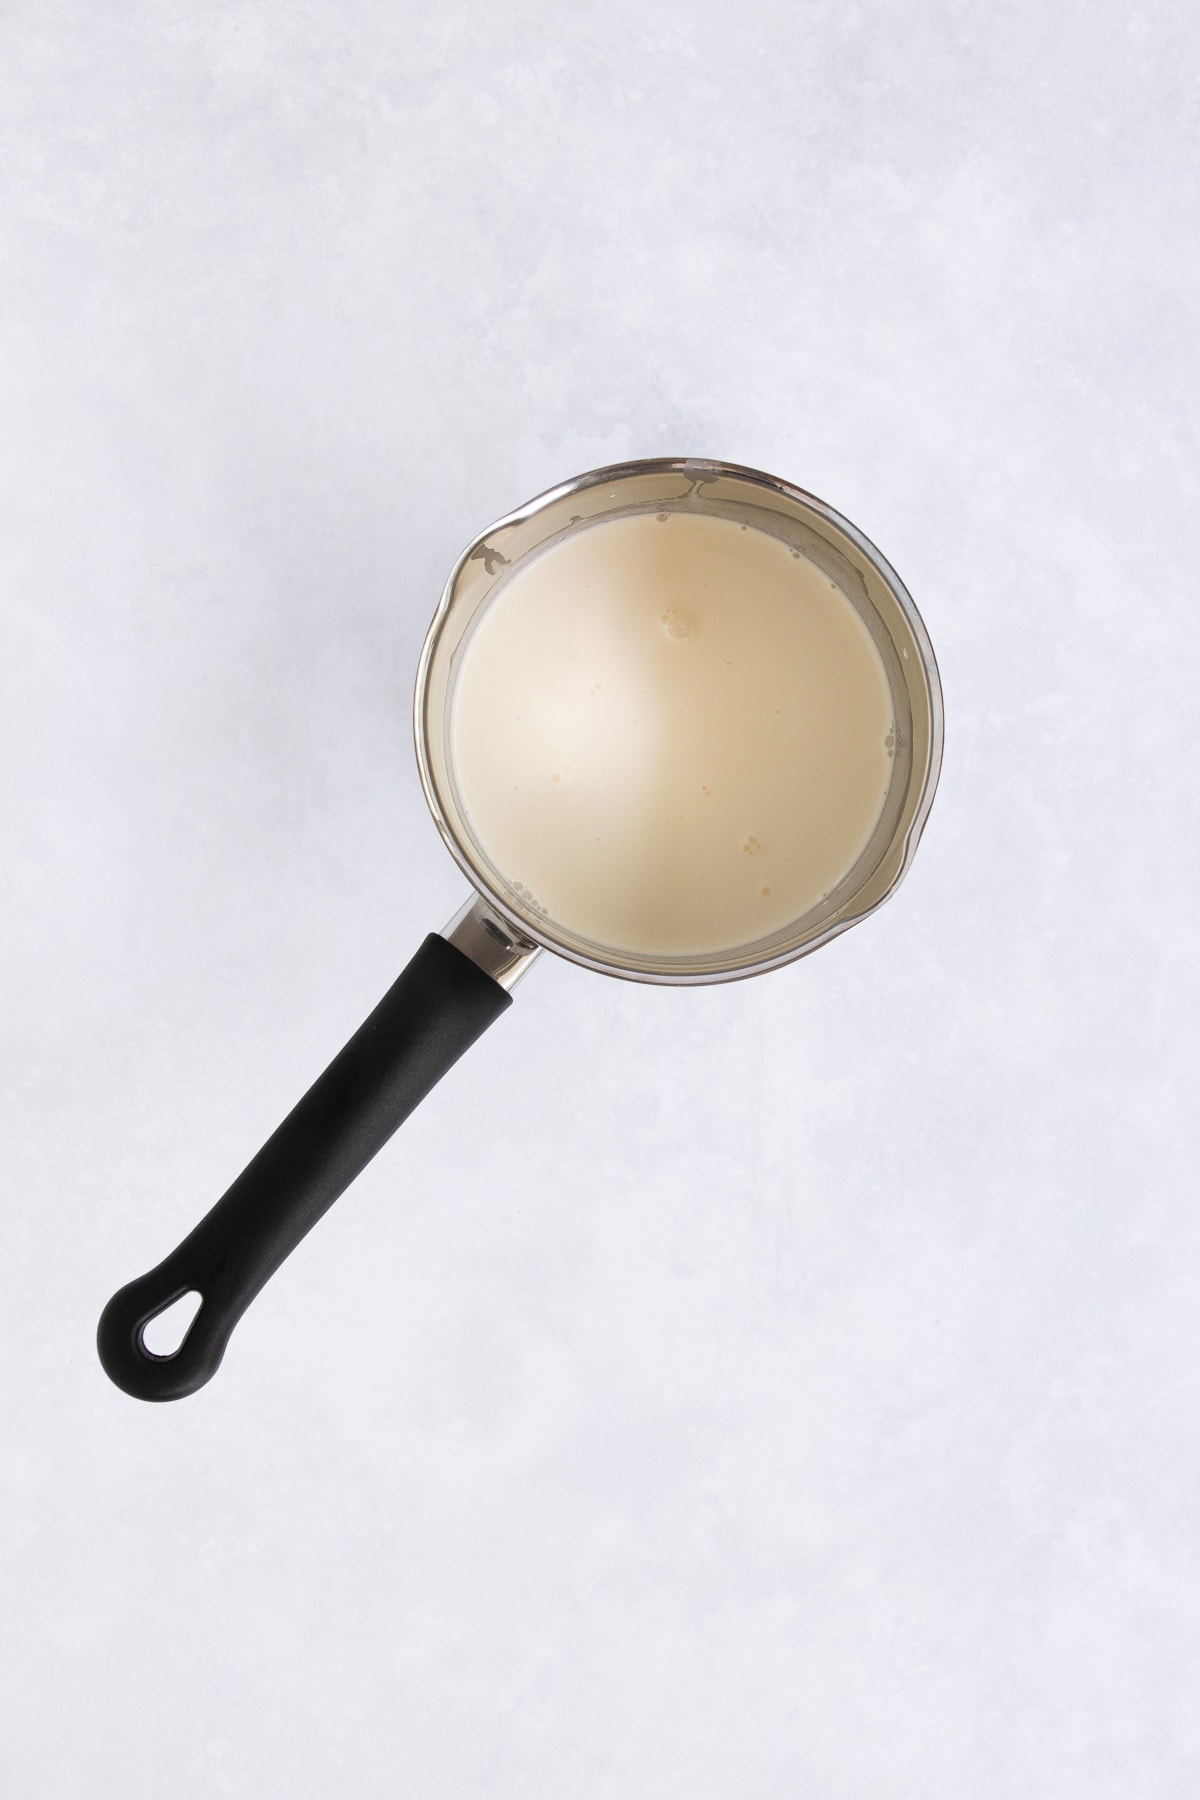 Cream in a small stainless steel saucepan with a black handle. 